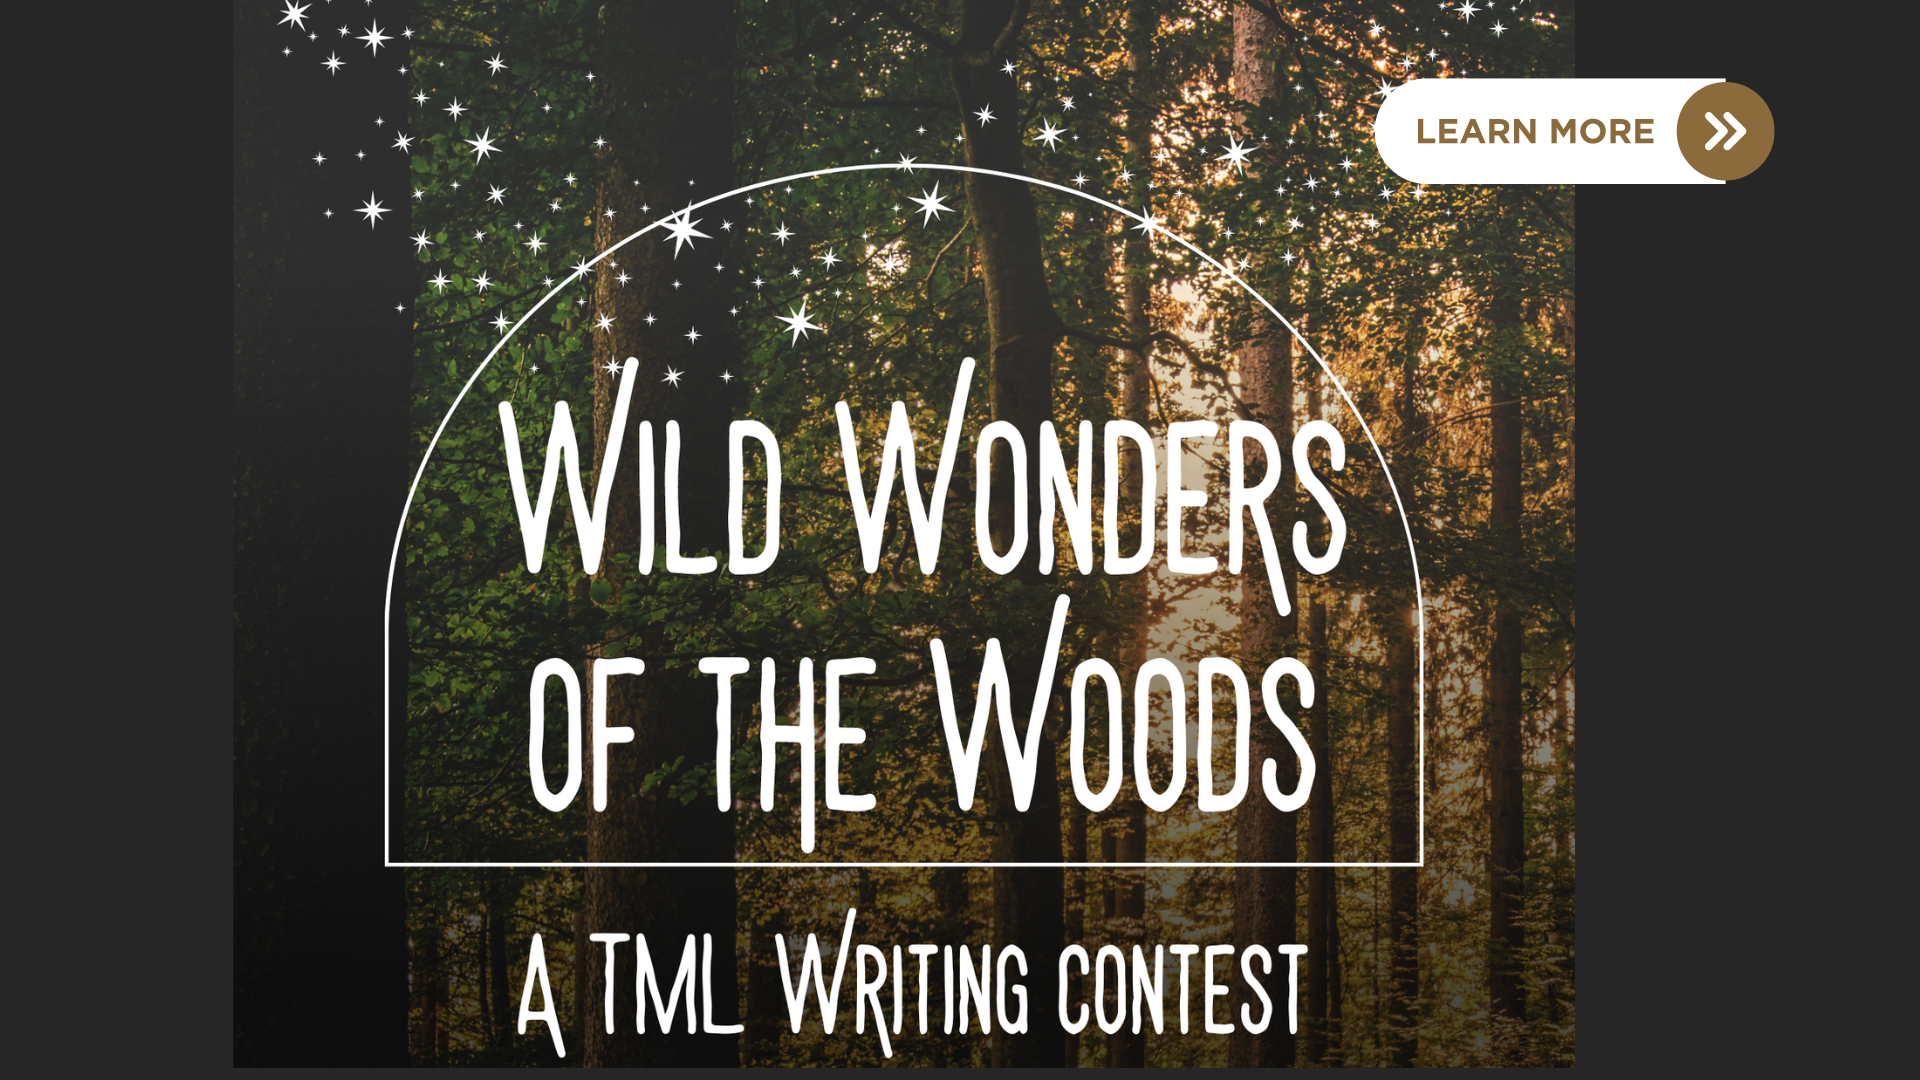 dark woods in the background with white stars and the words "Wild Wonders of the Woods: A TML Writing Contest" with a click to learn more button